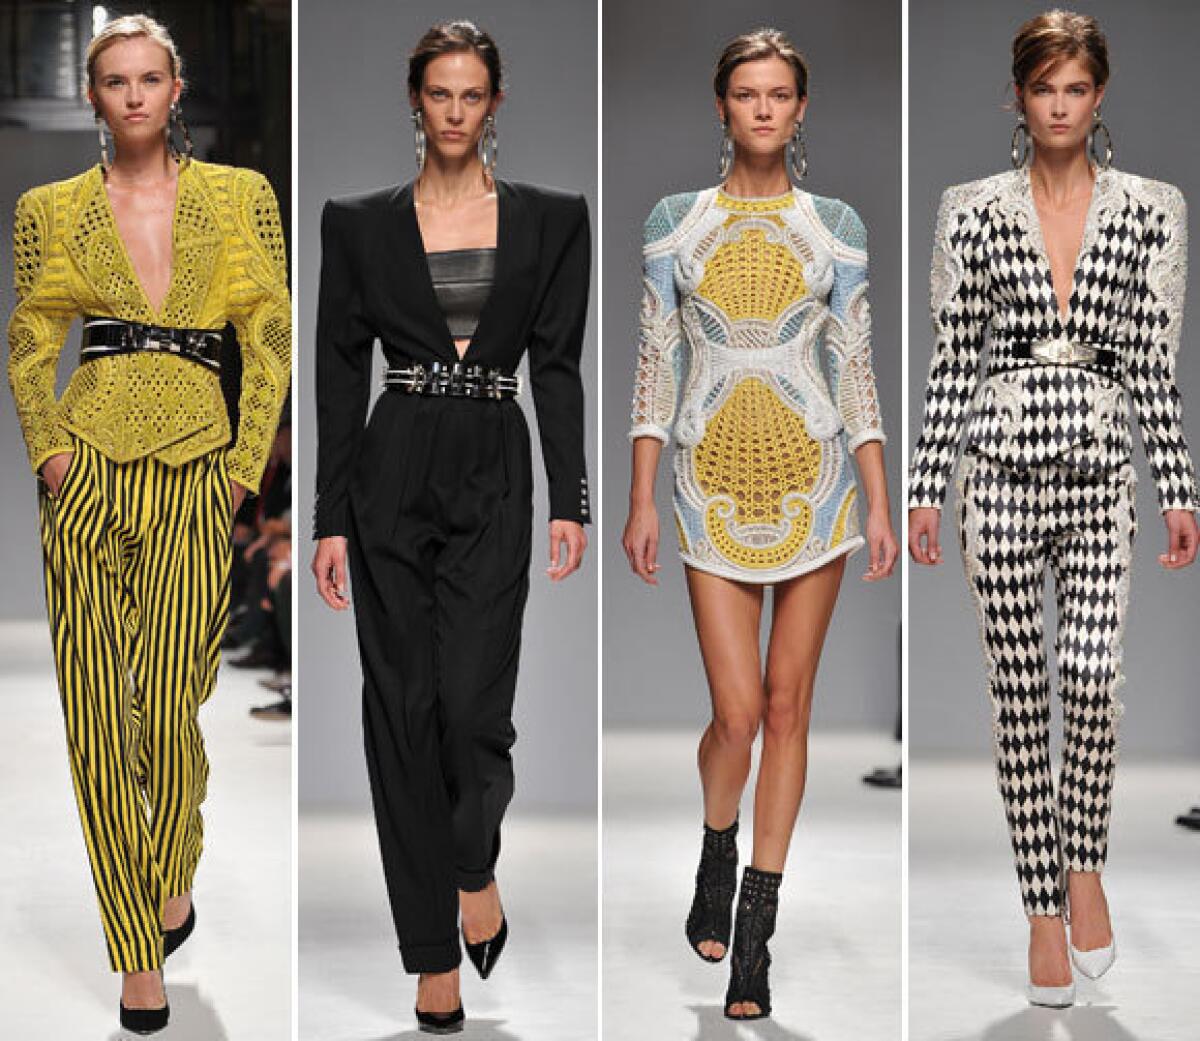 Looks from the Balmain spring-summer 2013 runway collection shown during Paris Fashion Week.